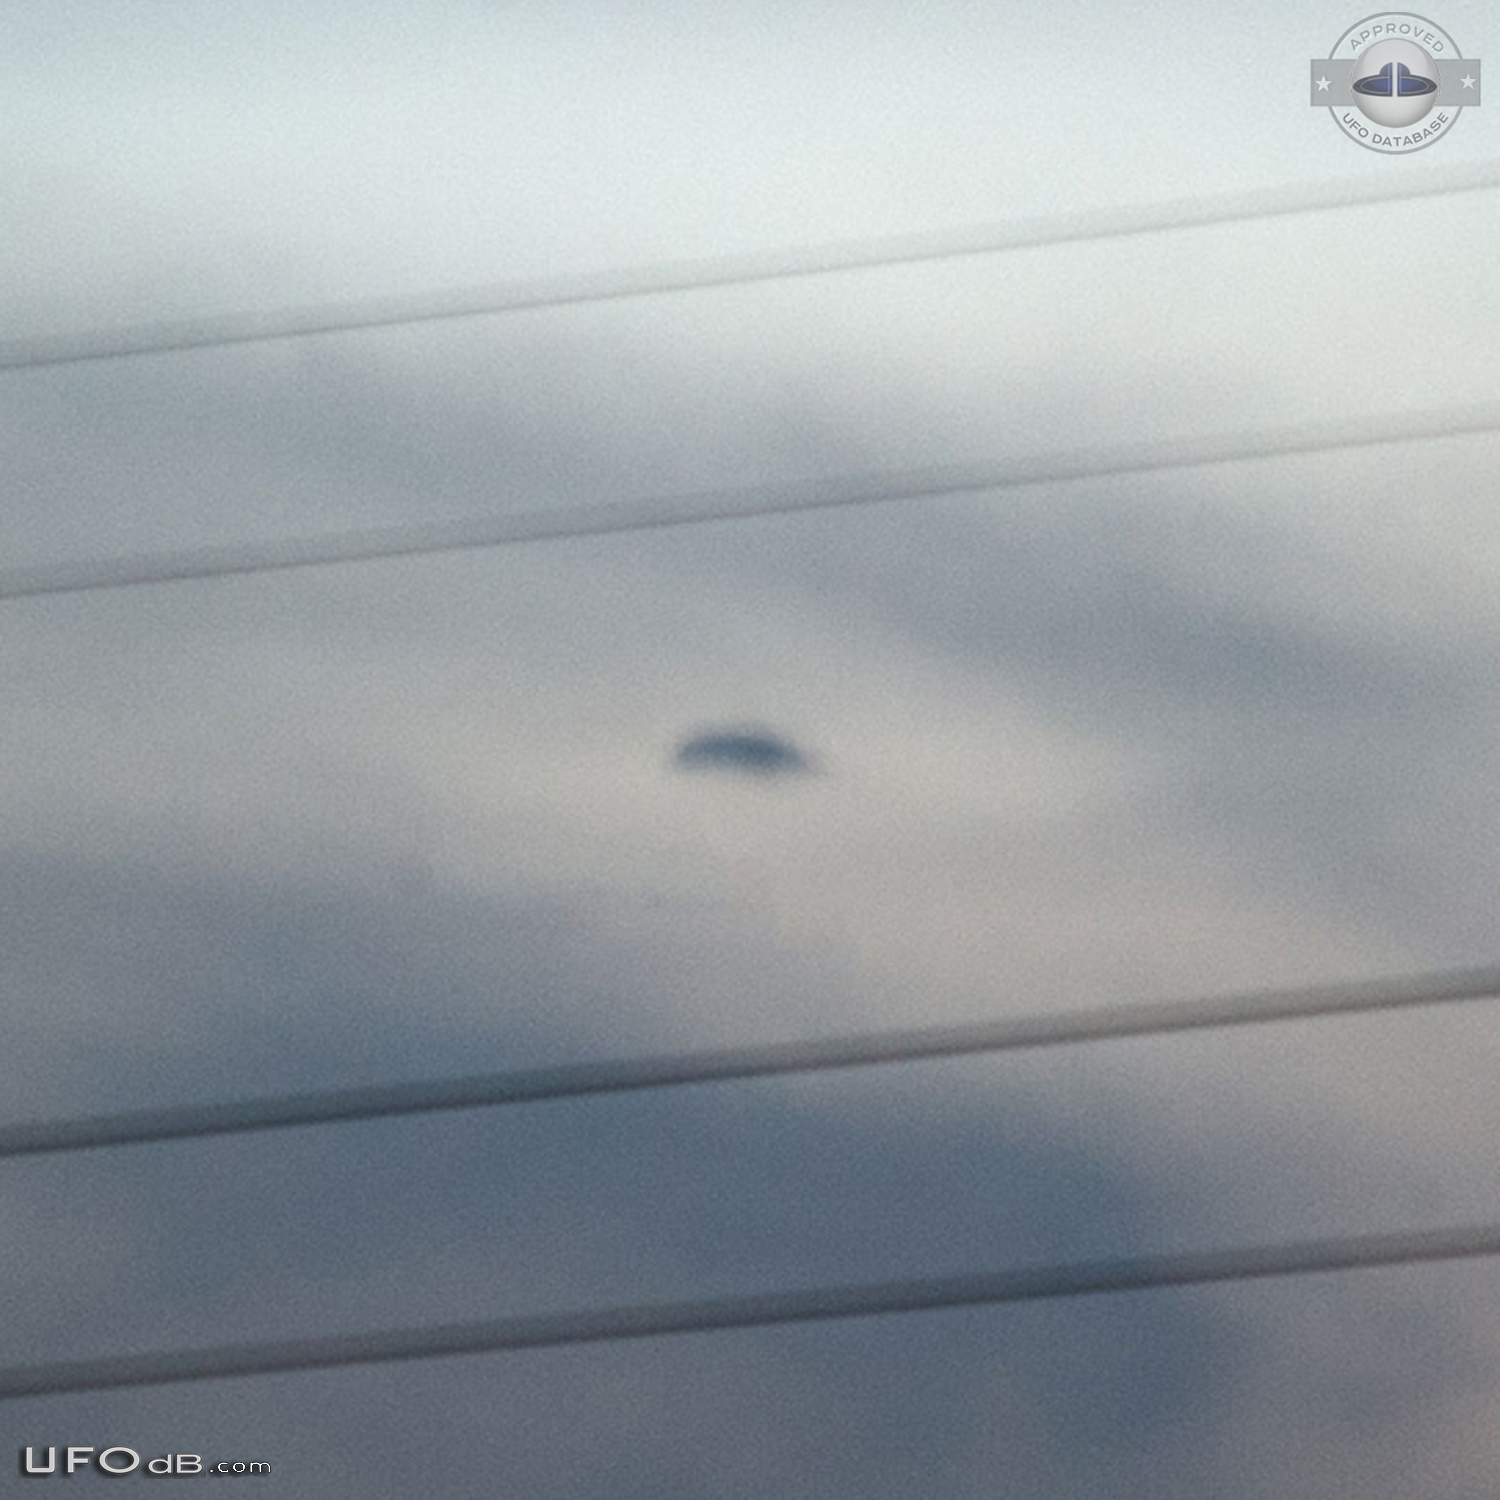 Hovering disc UFO moved then disappeared in the clouds Brisbane Queens UFO Picture #776-3